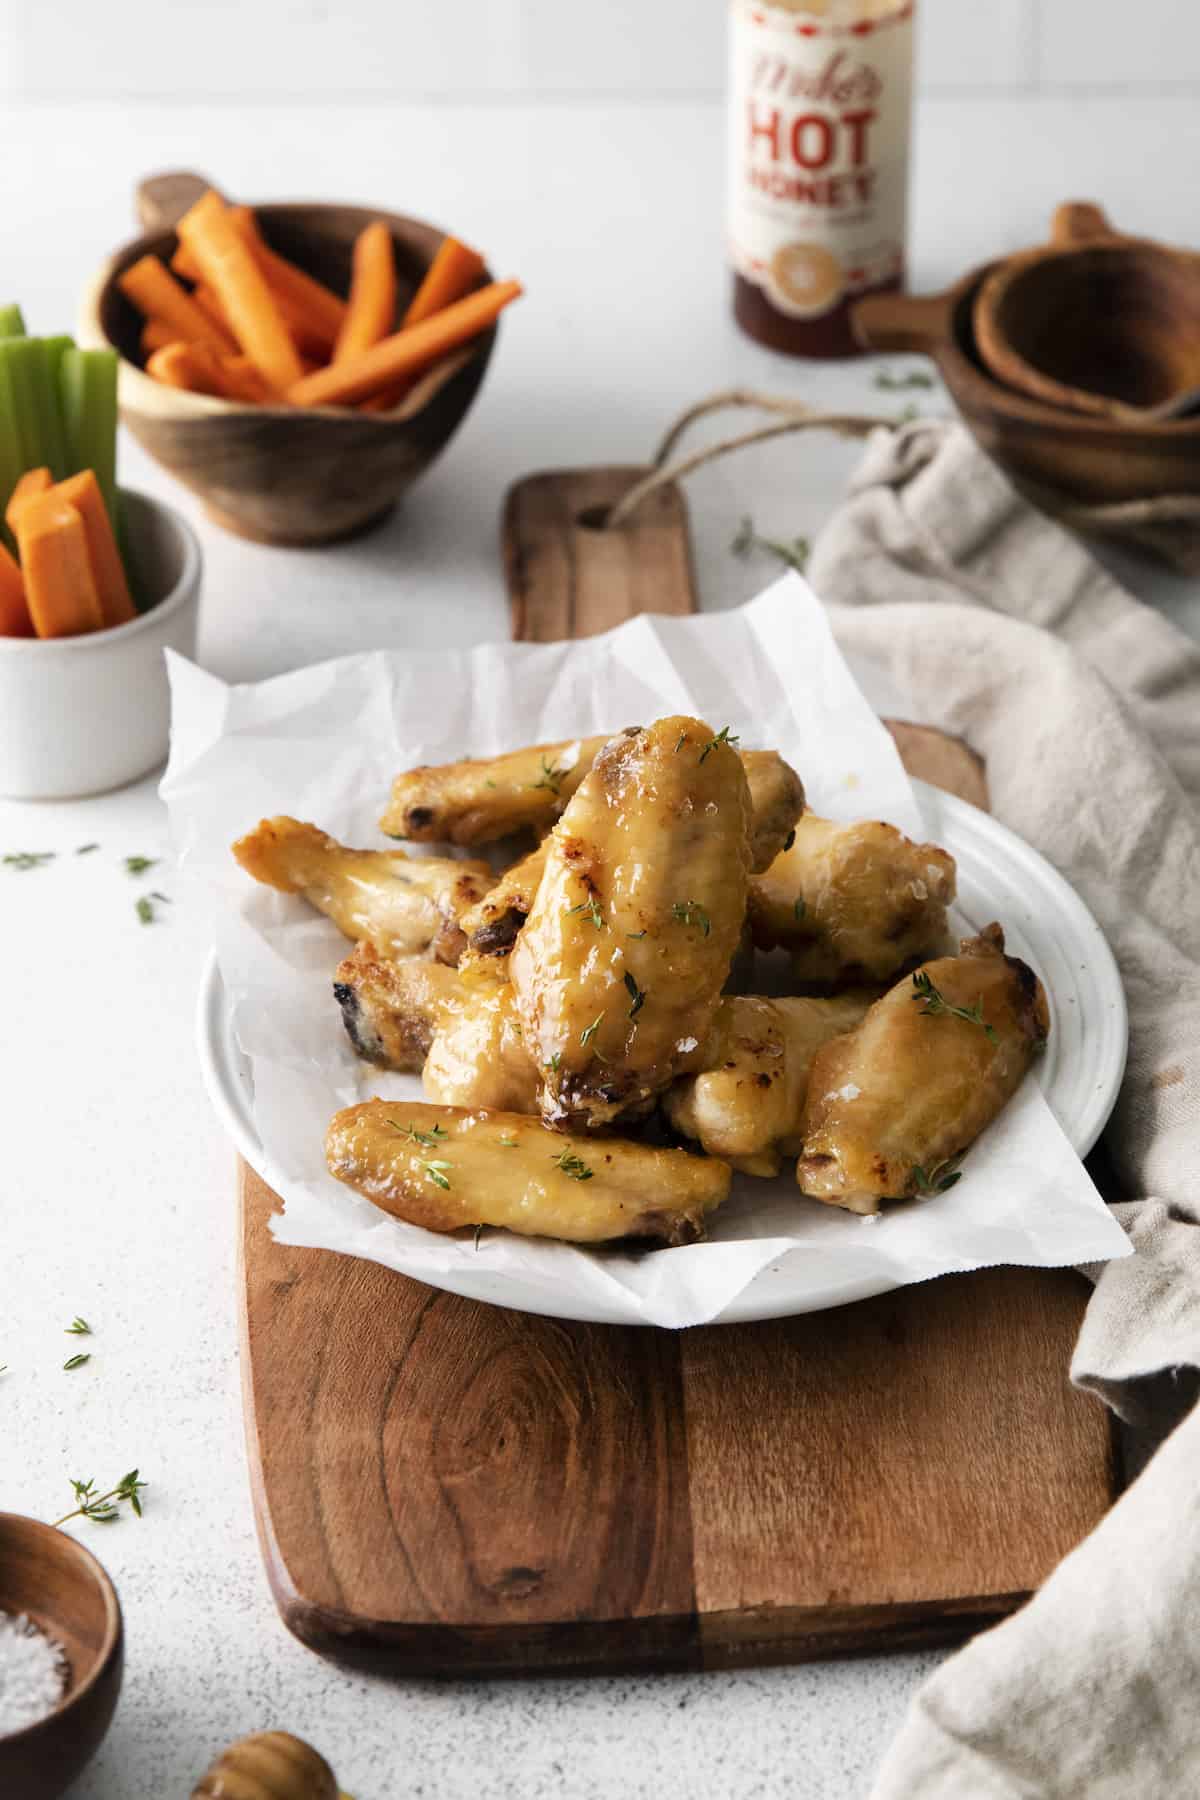 the completed honey hot wings recipe served on a white plate